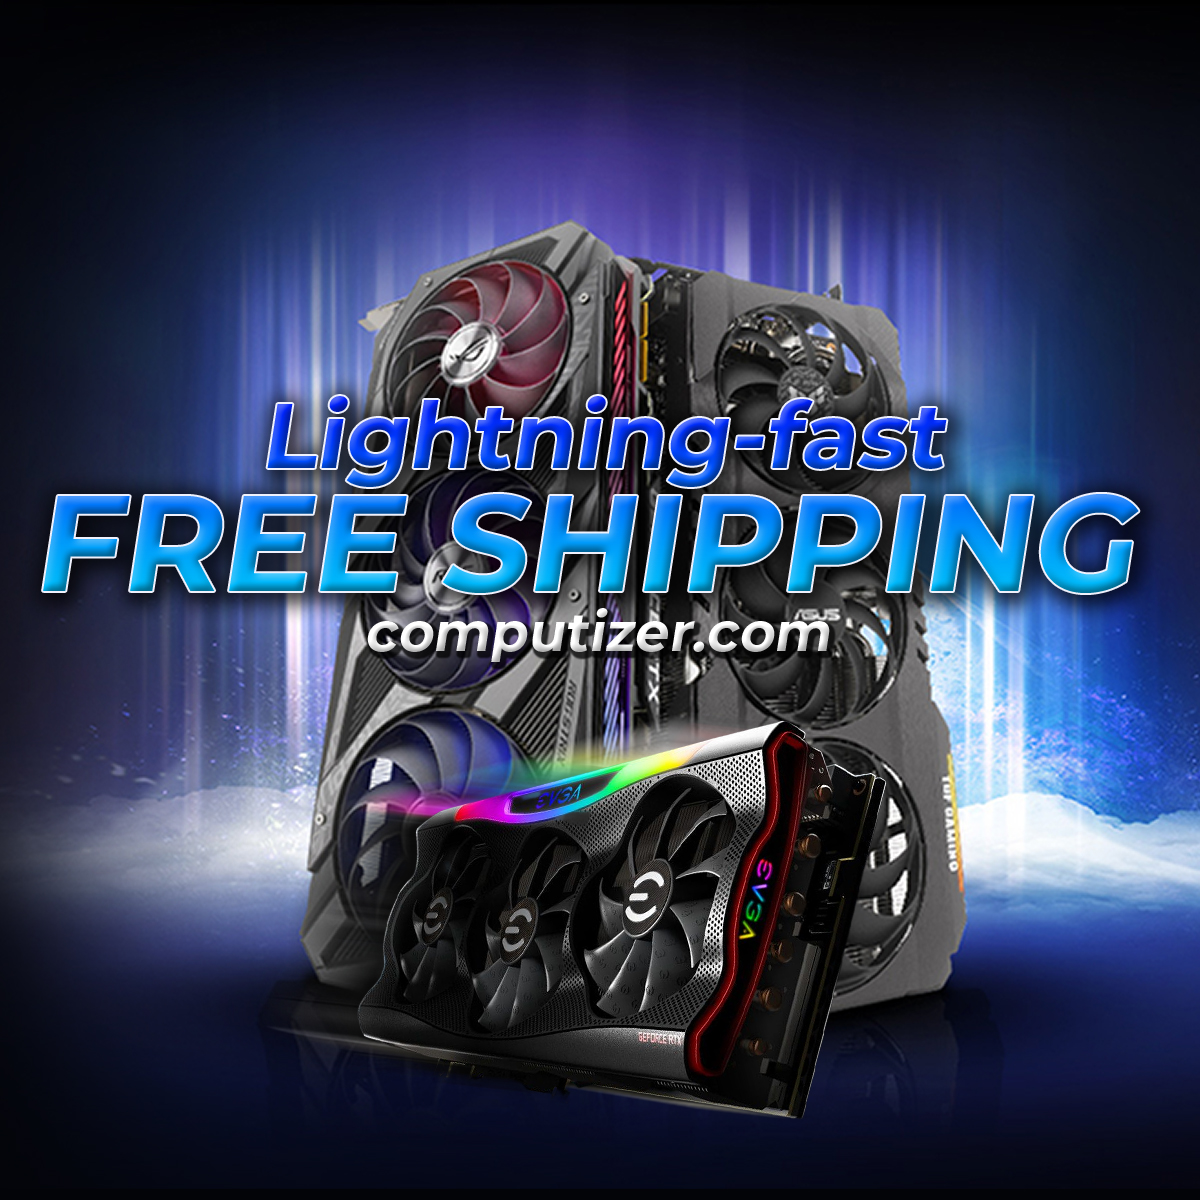 Get your hands on the latest graphics cards with lightning-fast speed! Enjoy free shipping on all orders, ensuring you receive your purchase without any additional costs or delays. #FastFreeShipping #GraphicsCards #UltimateGamingExperience #shopnow